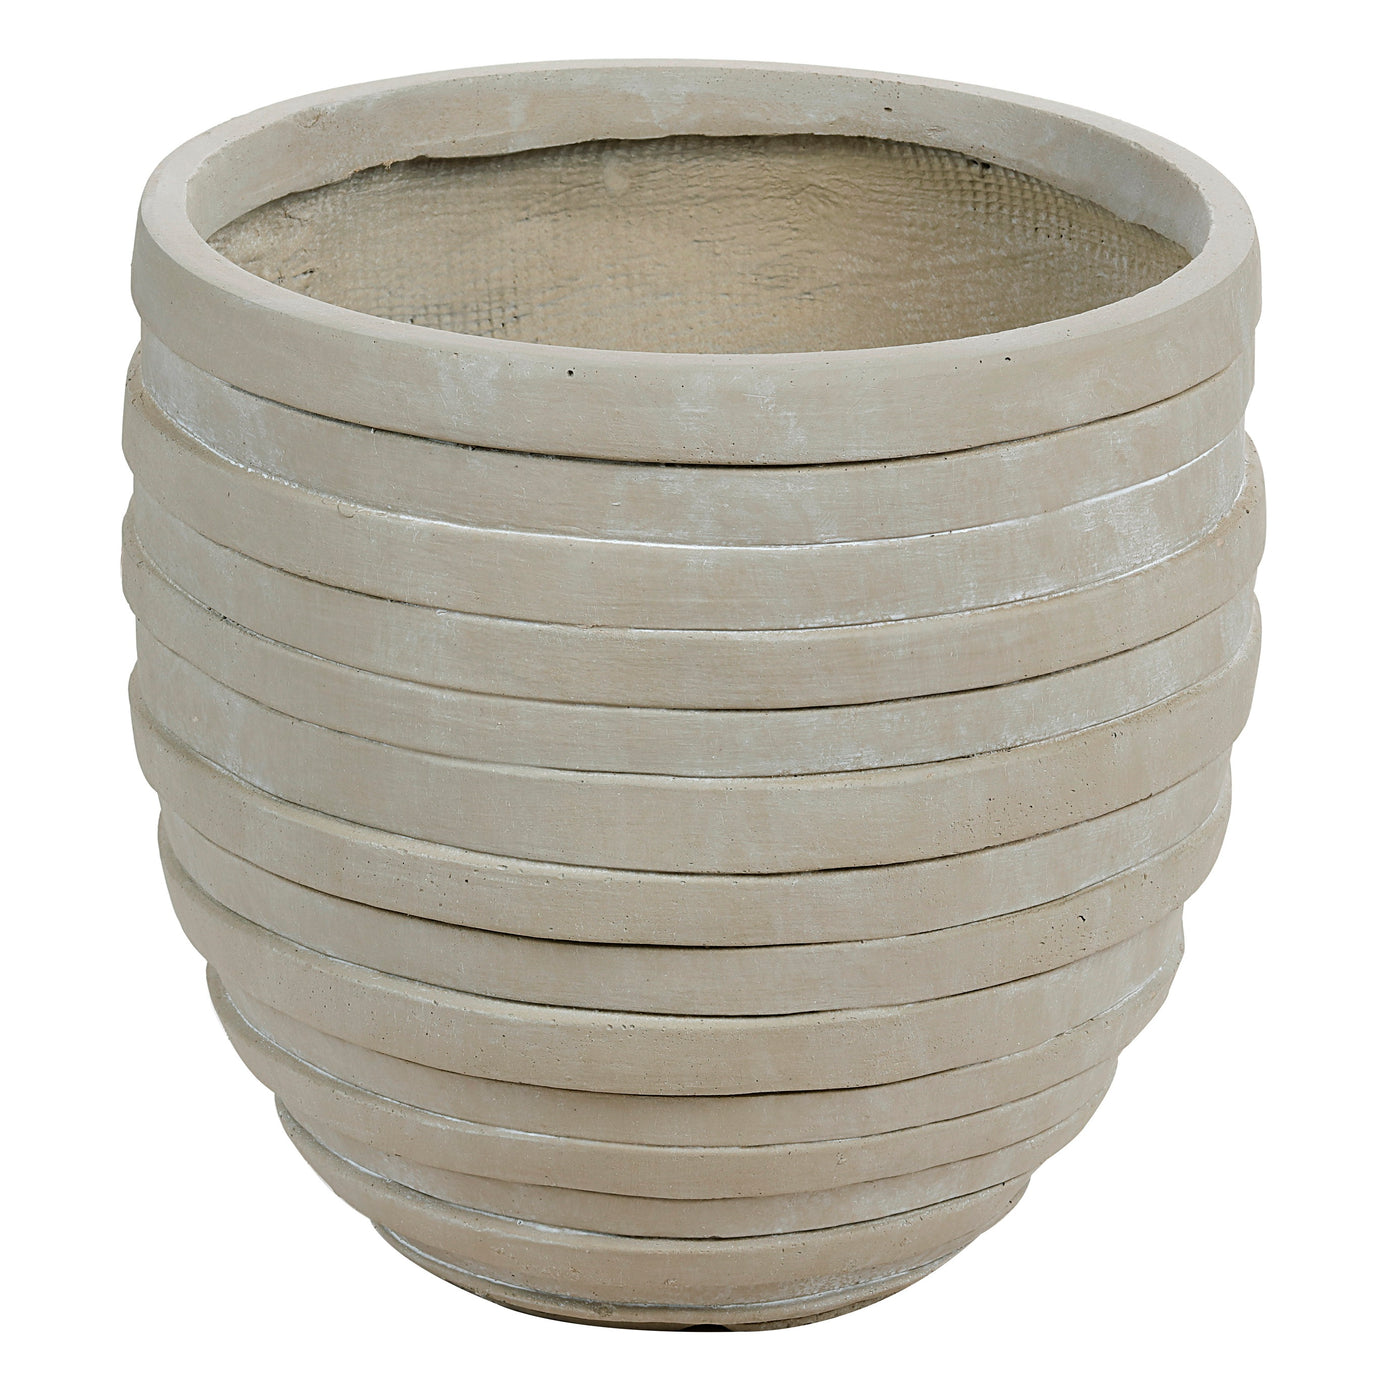 High-quality horizontal striped textured planter in natural taupe